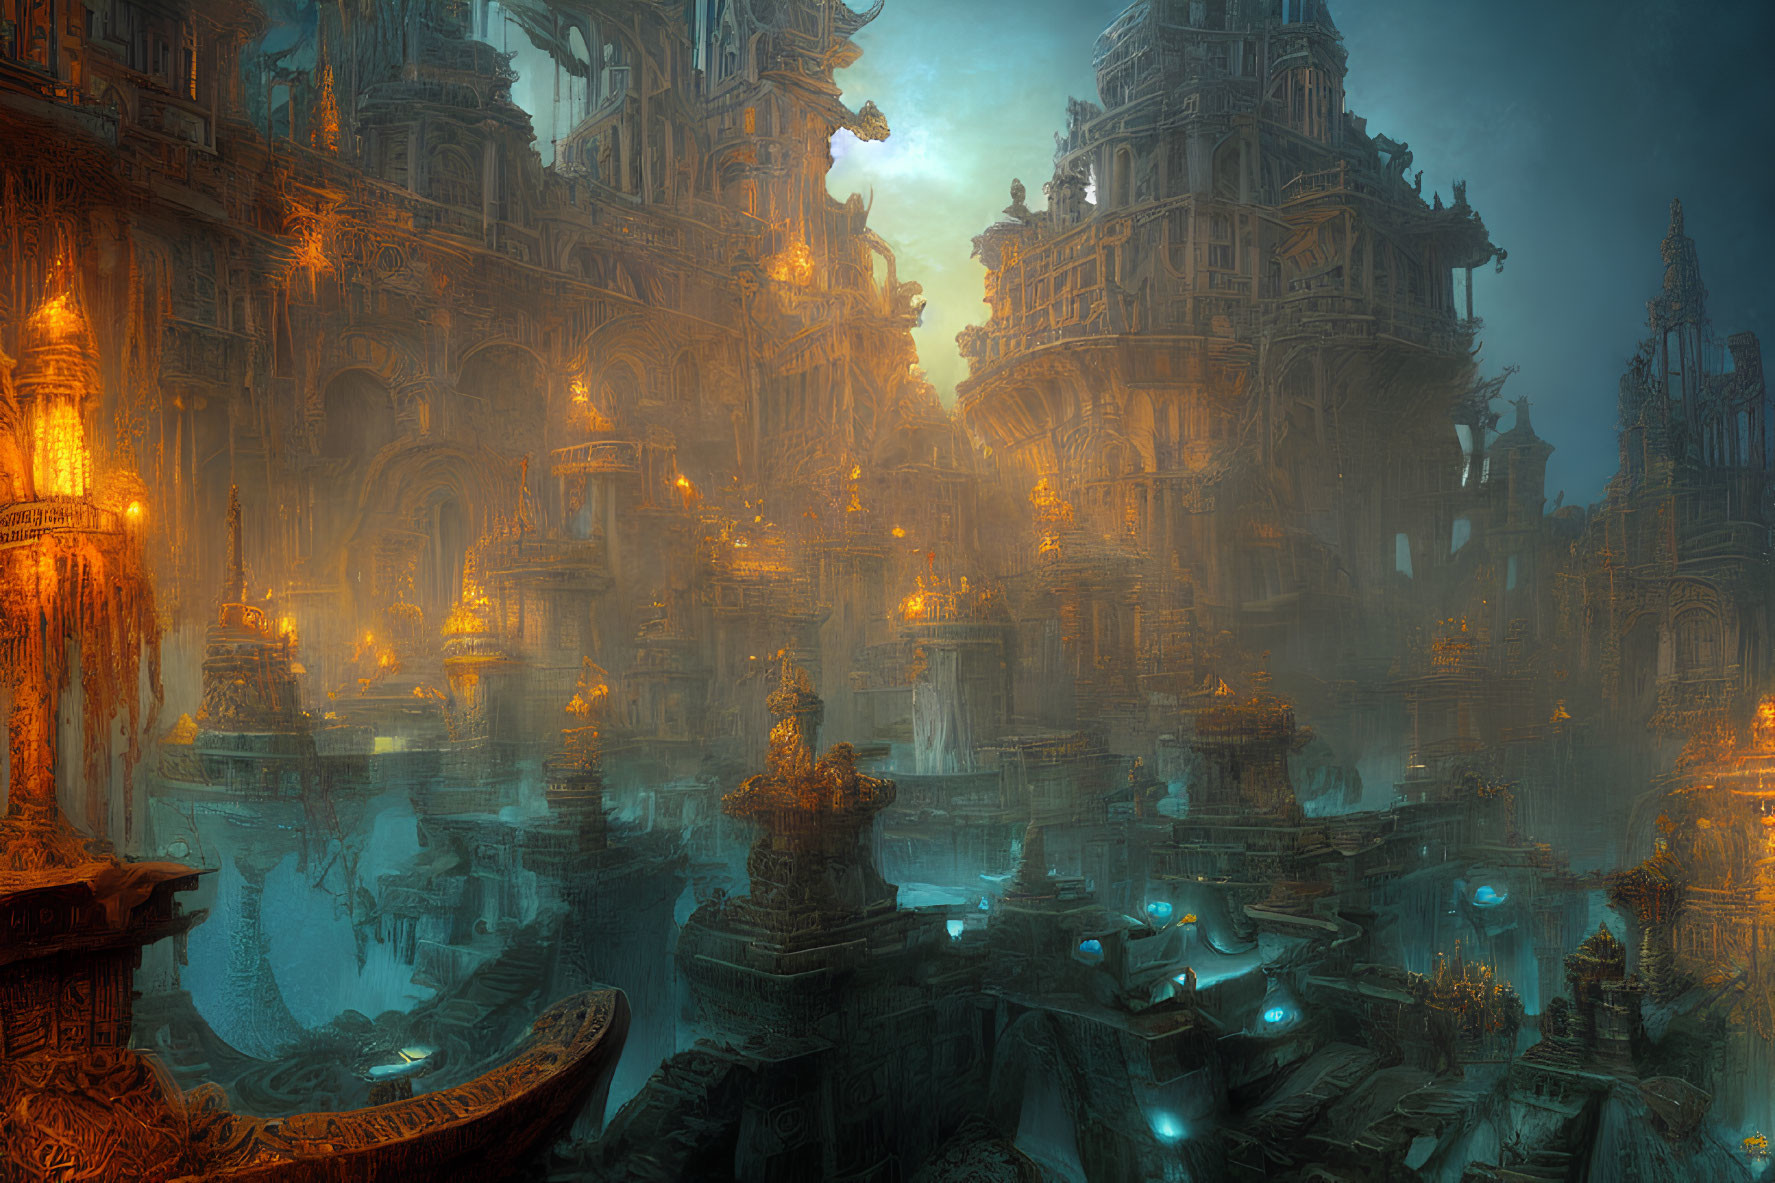 Intricate fantasy city with ornate towers and glowing lights